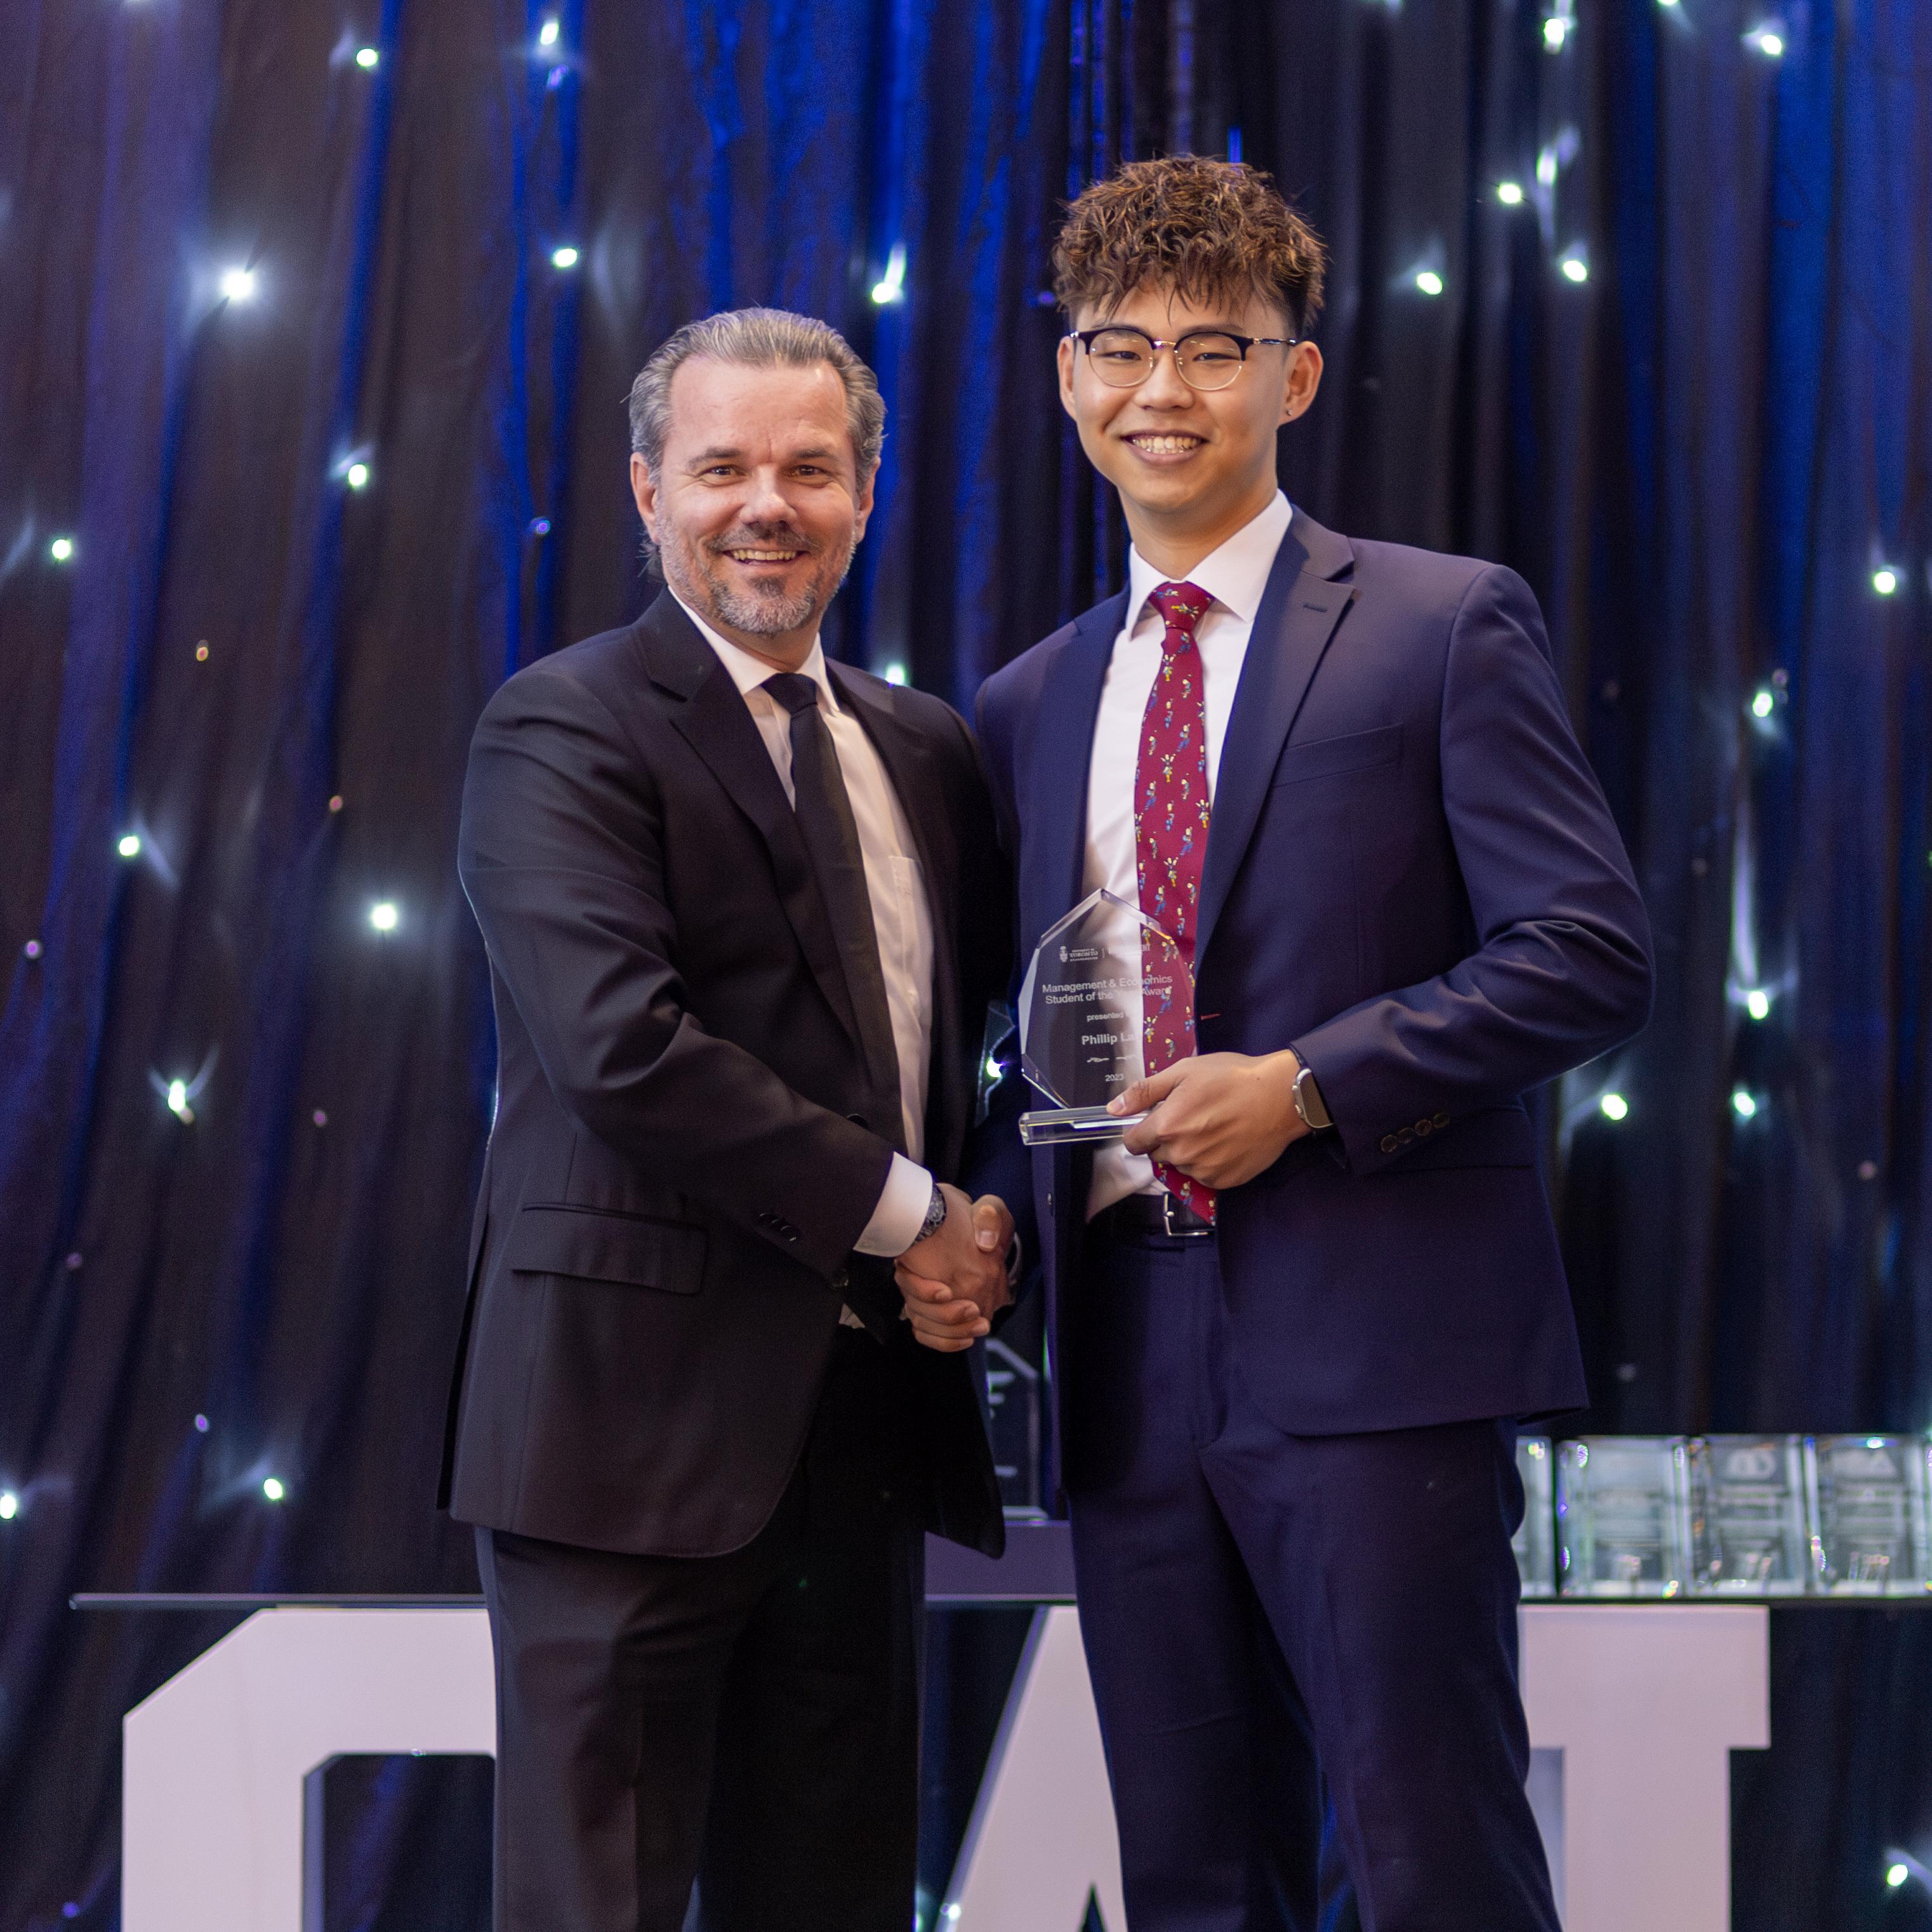 Phillip Lau smiles while shaking hands with the Acting Chair of Management Jean de Bettignies during the University of Toronto Scarborough Management Gala.